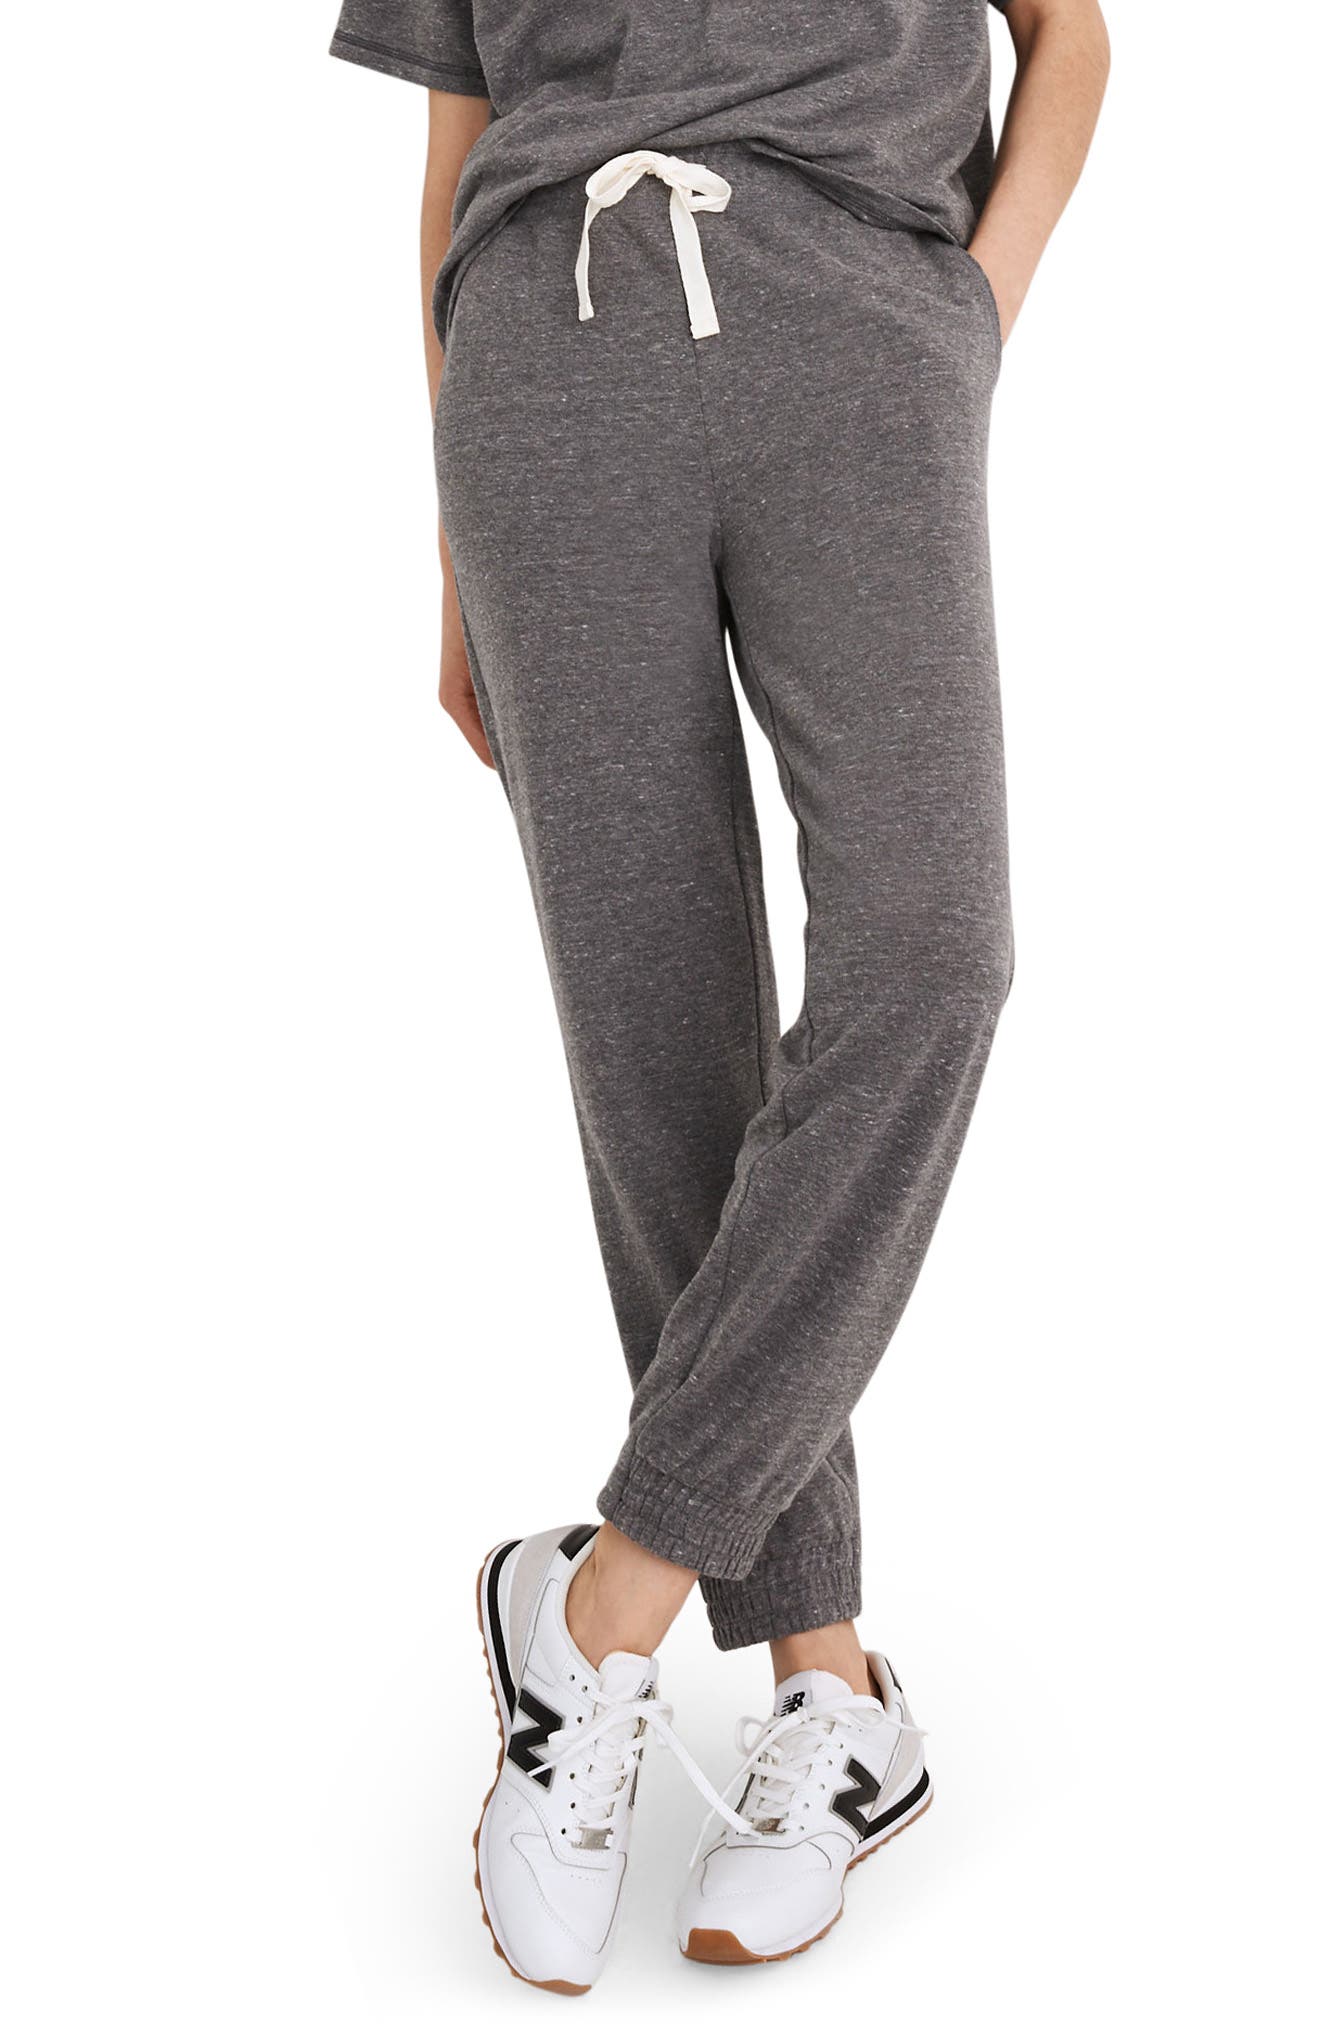 Madewell MWL Skyterry Easygoing Sweatpants in Heather Storm